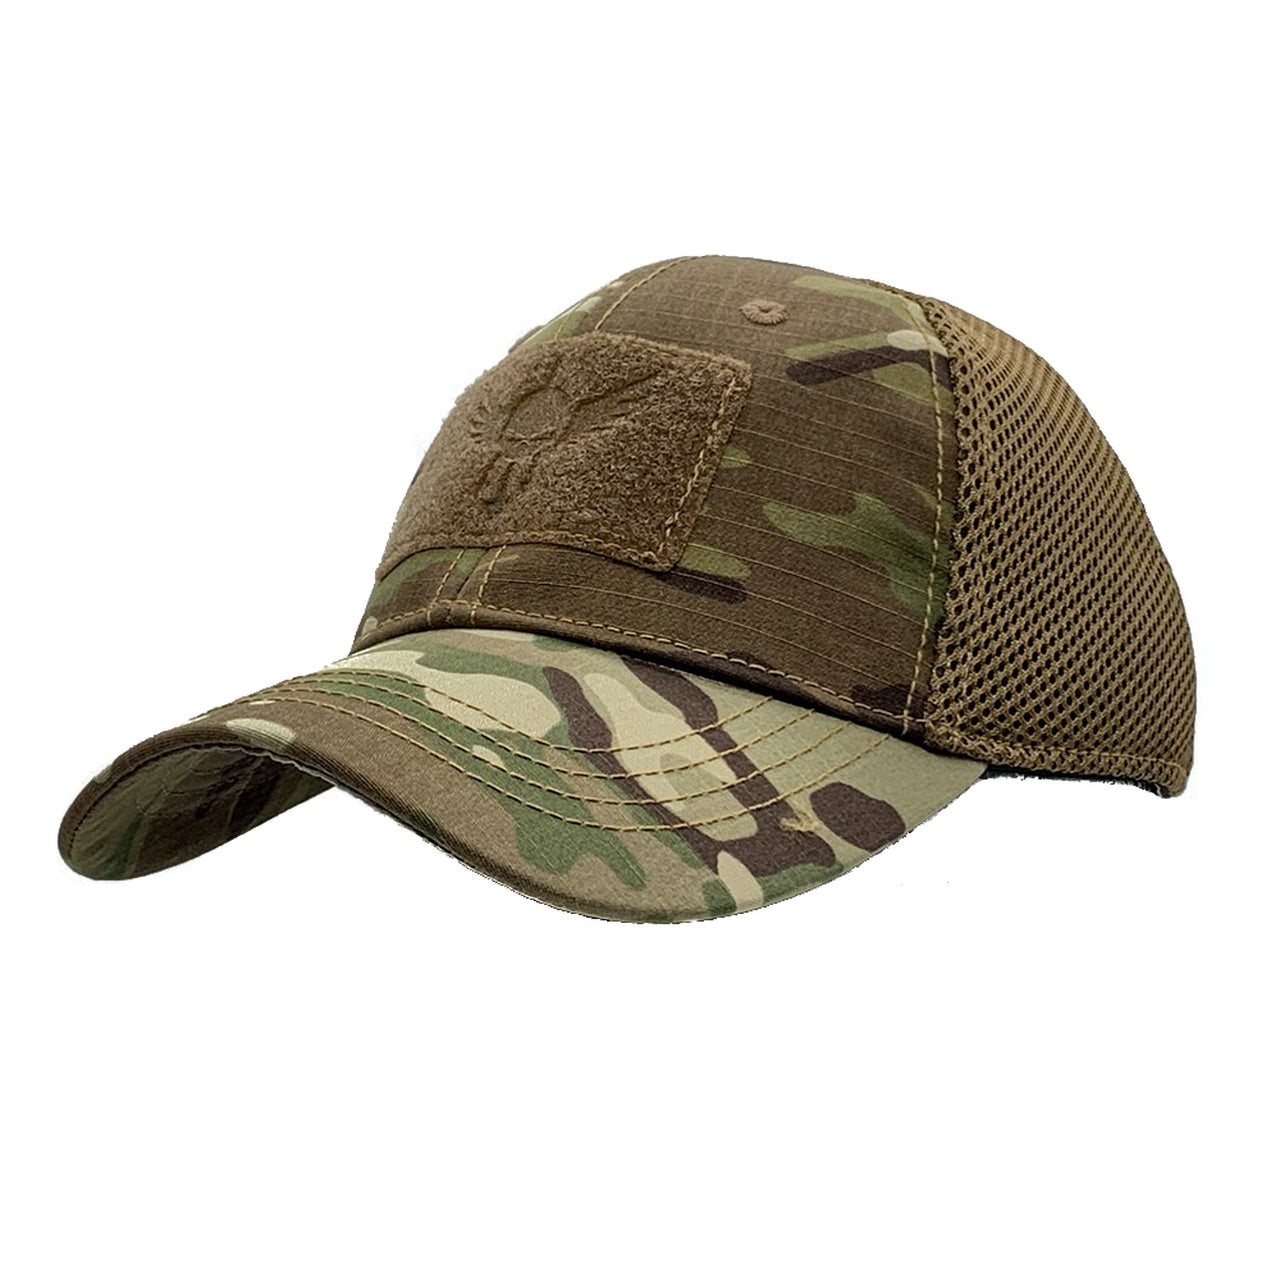 A Shellback Tactical Flex Tactical Cap with a patch on the front.